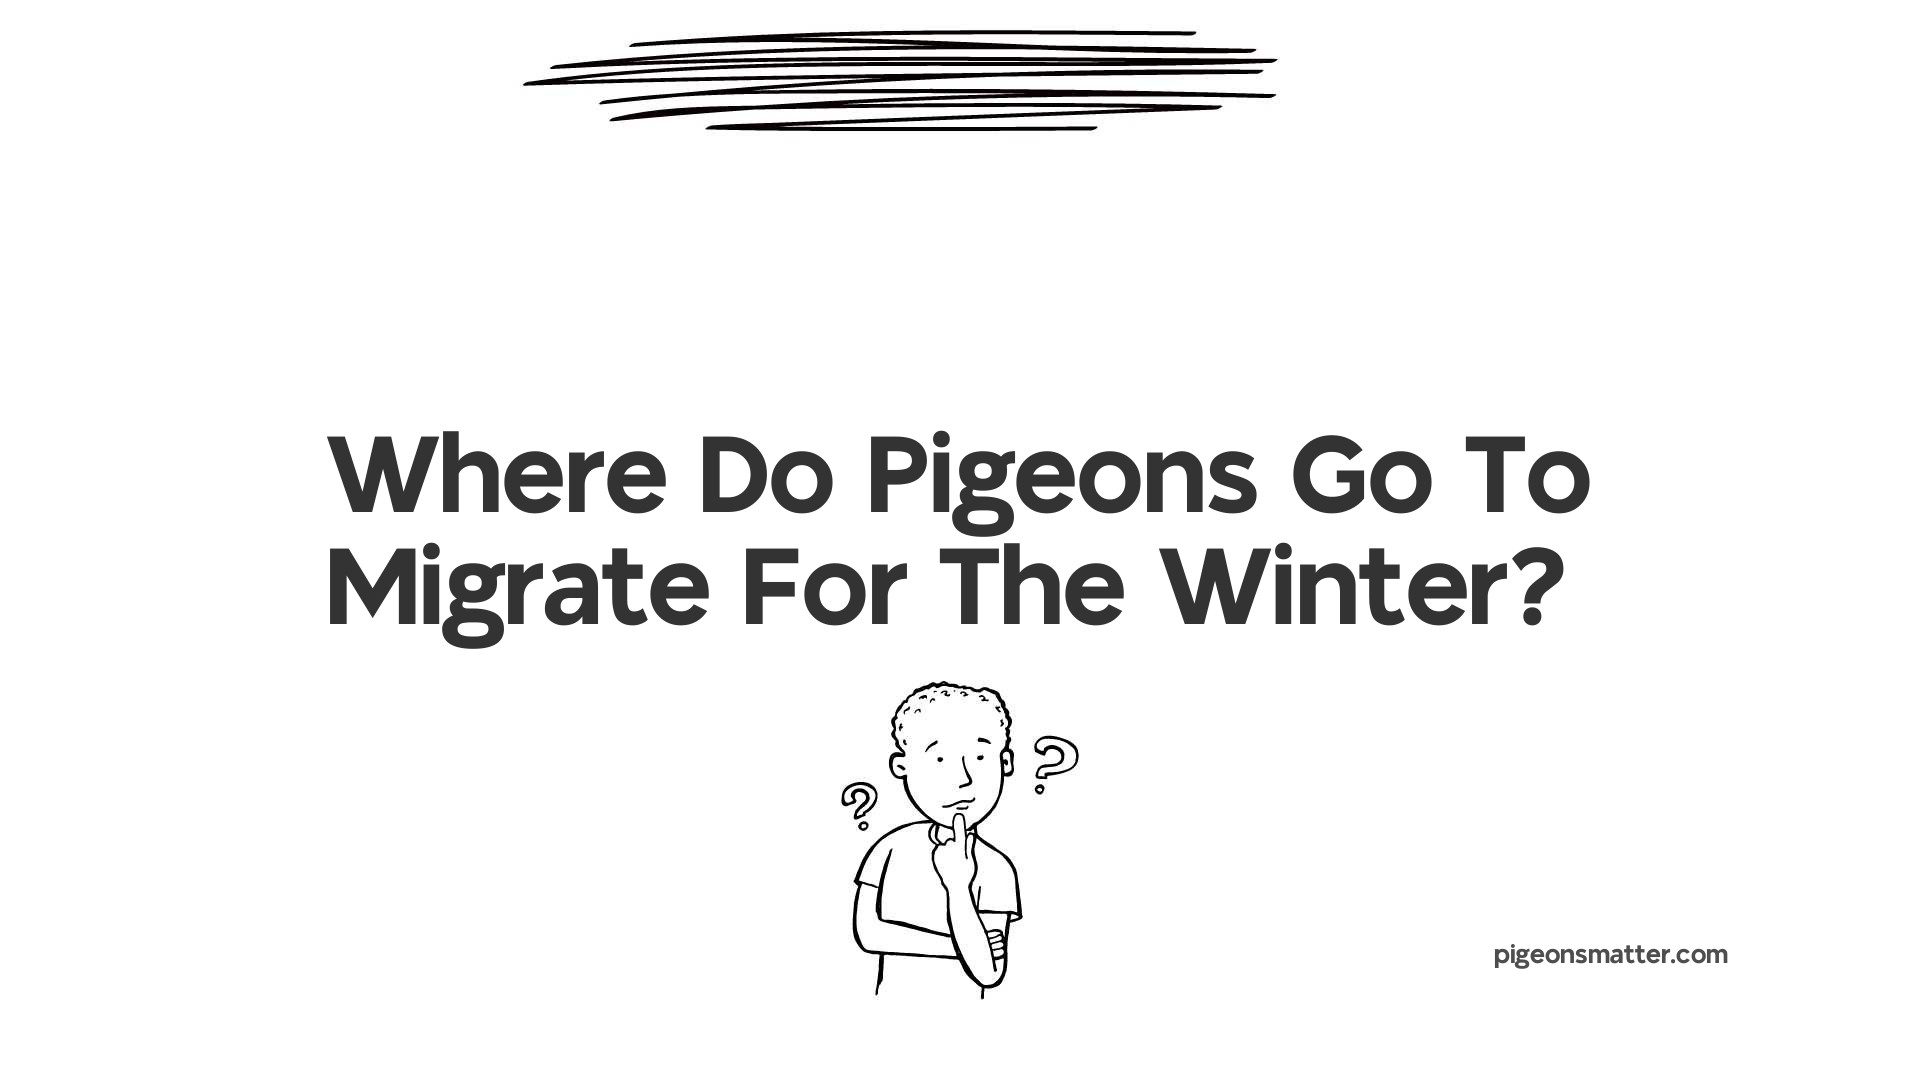 Where Do Pigeons Go To Migrate For The Winter?